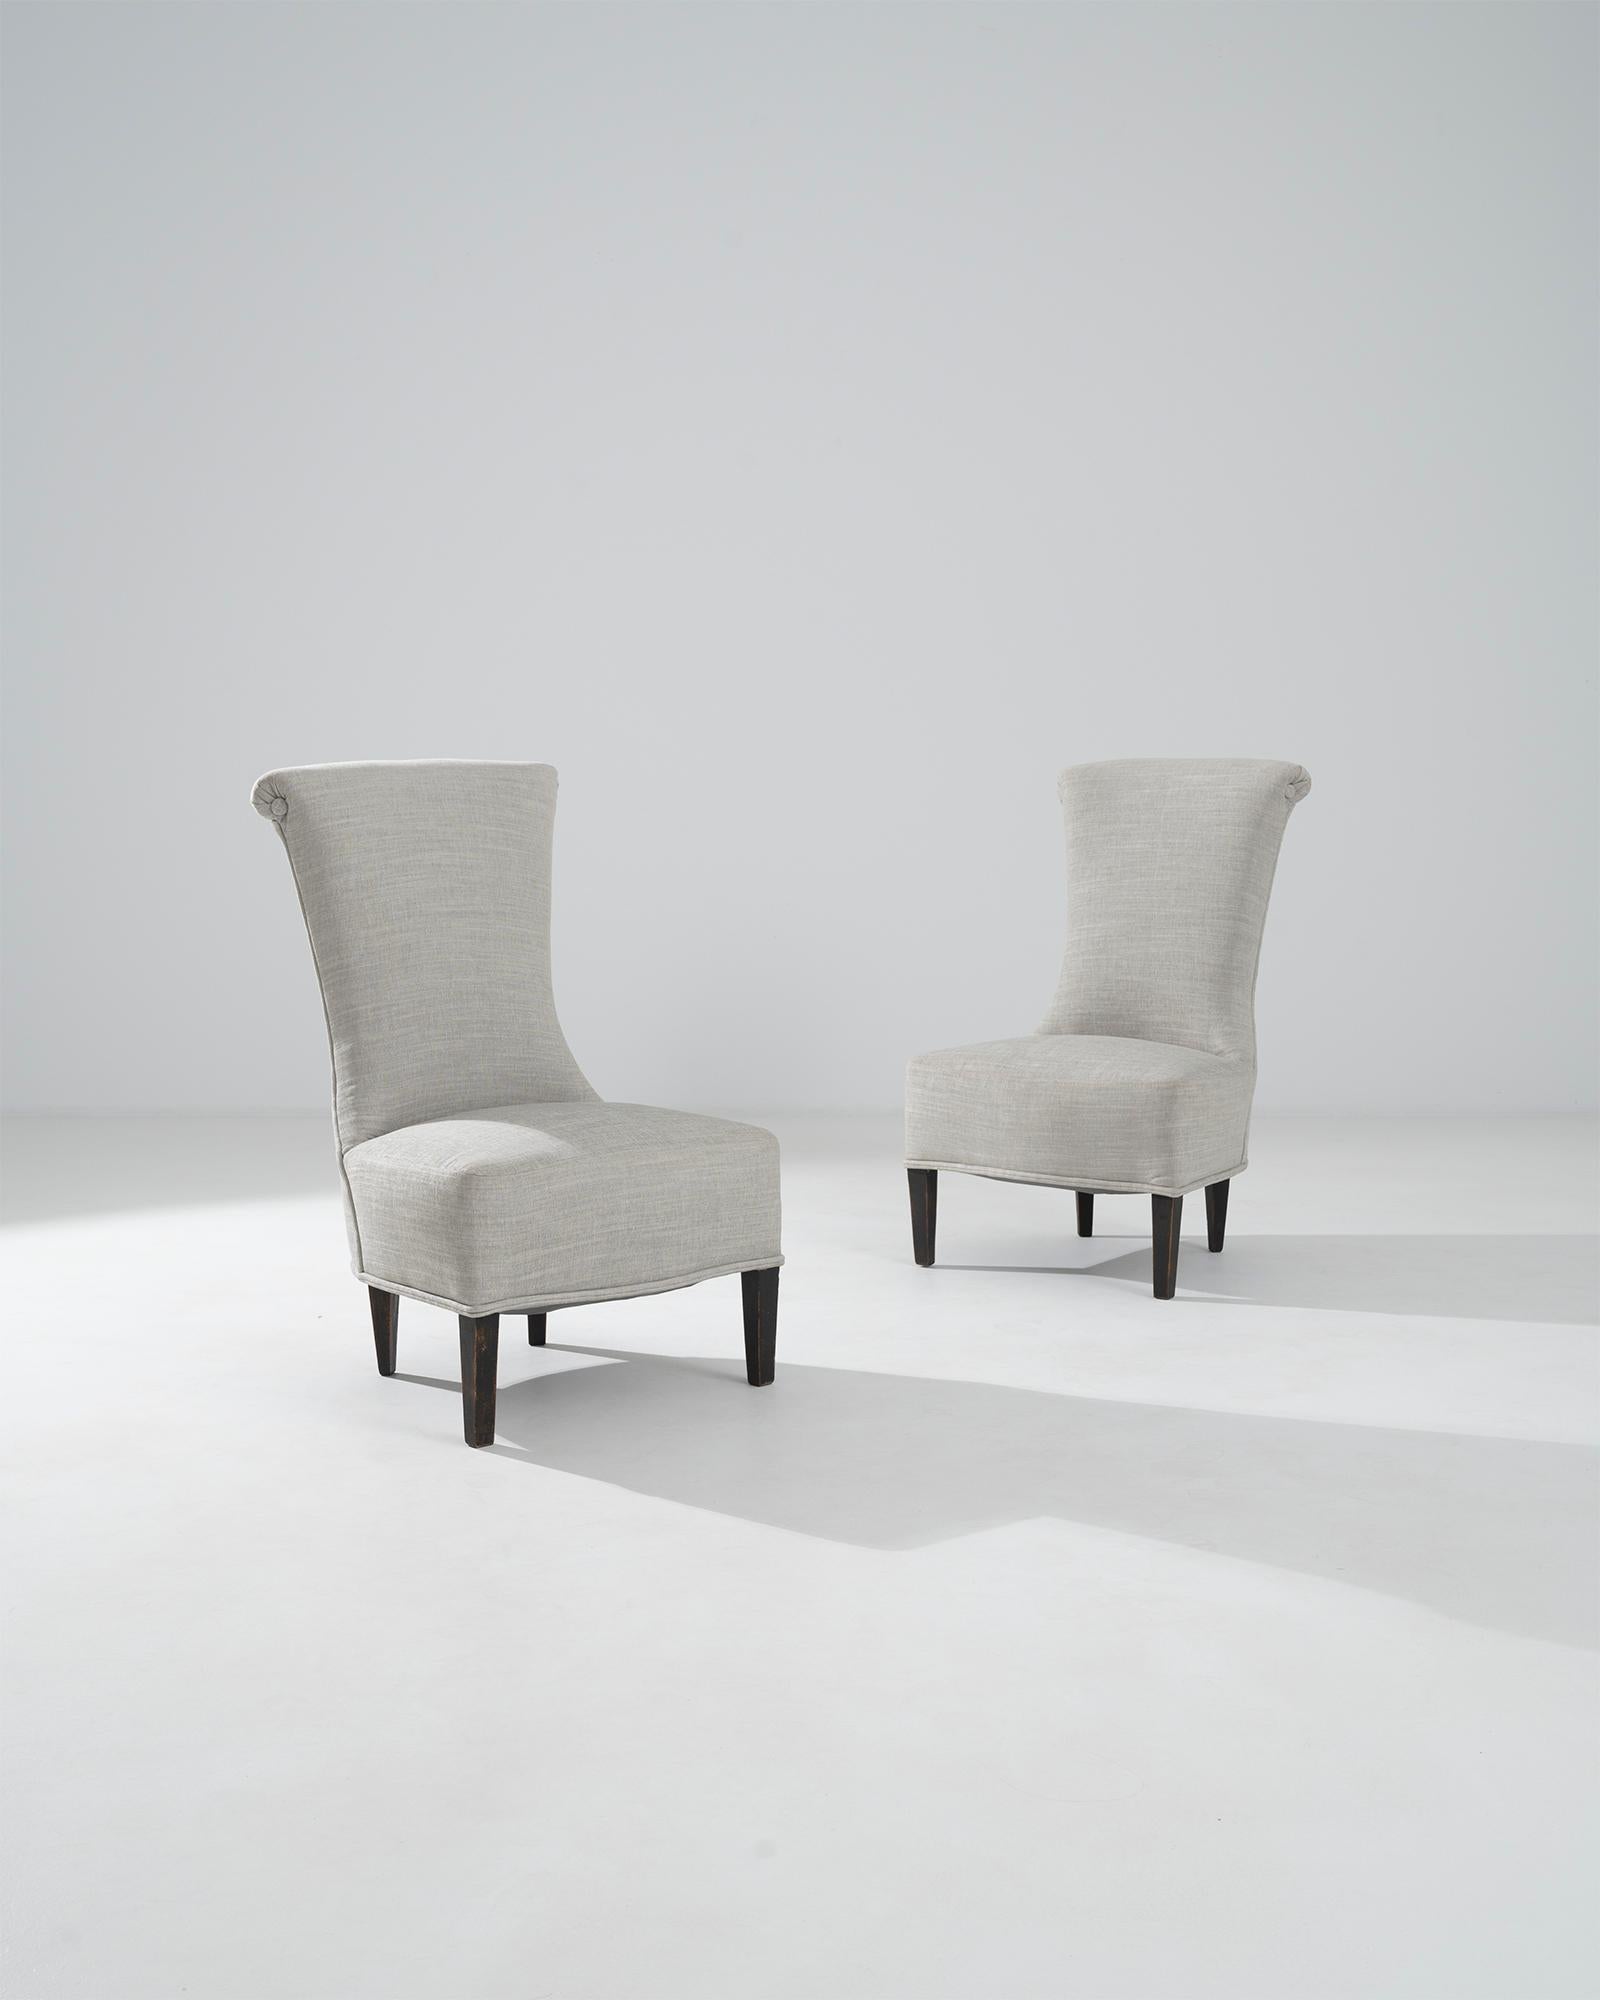 A pair of wooden upholstered chairs from 1900s France. Skinny waists and wide high-arching backs form a pleasing hourglass-like construction. A bright and clean upholstery slopes down across the back and seat of these chairs, creating a cascading